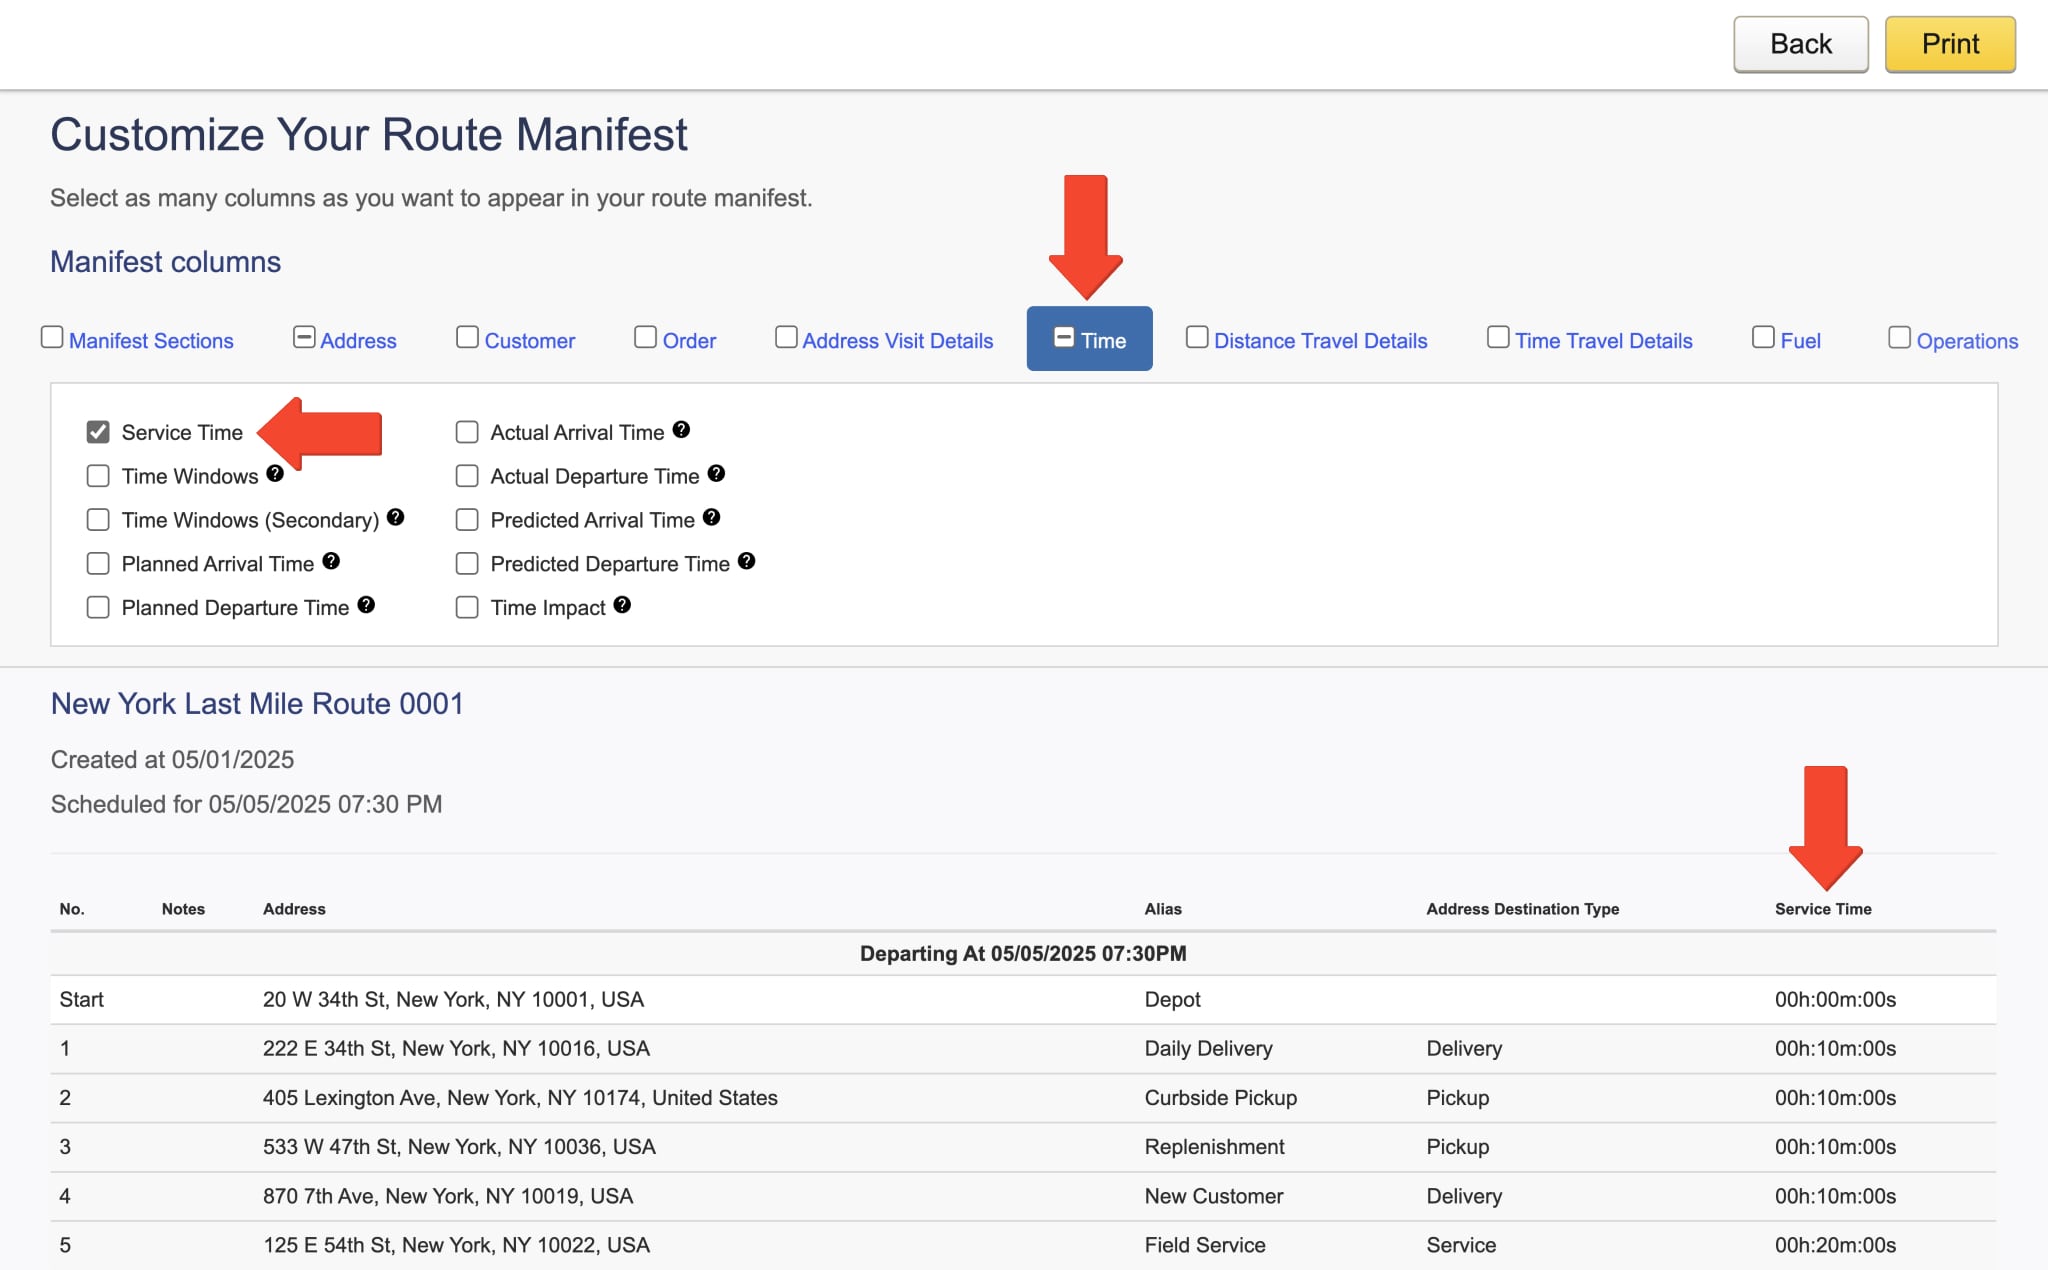 To enable Service Time on the Route Manifest, go to the Time tab and check the box next to Service Time.